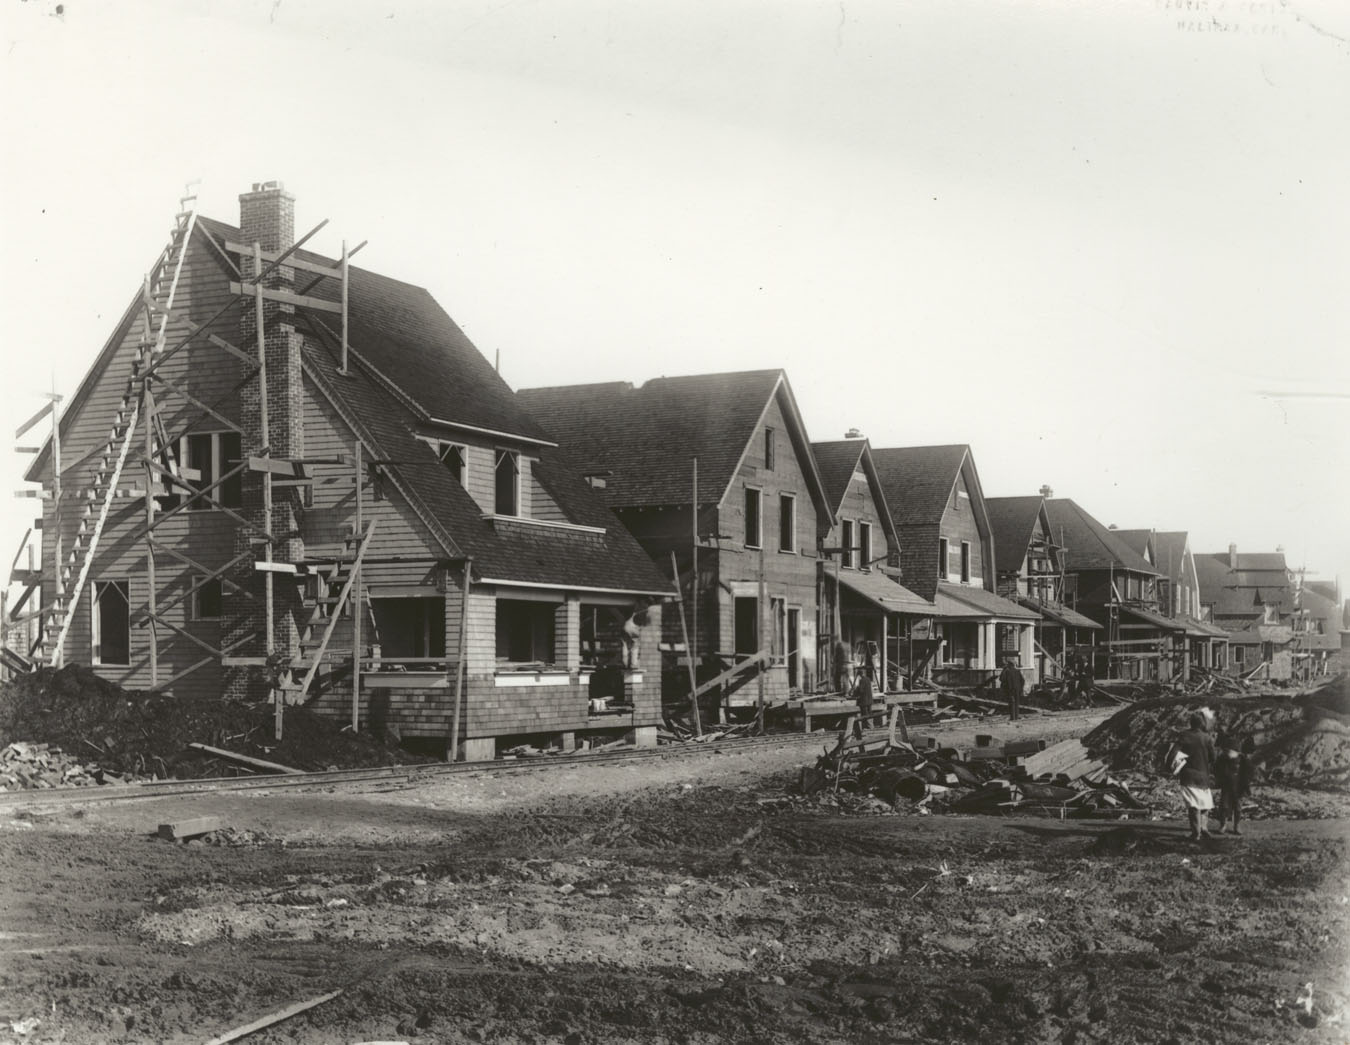 Original photograph copied through the courtesy of the Maritime Museum of the Atlantic [N.S. Education Media Services negative N-14,131].                  The temporary railway tracks served to bring materials to the Isleville Street siding for construction of hydrostone buildings.  The house at left was built using Ross & Macdonald design D.18.  The present addresses for the houses are (left to right) 5875-5877 Kaye Street.  Variations of this design were built throughout the north ends of Halifax and Dartmouth.